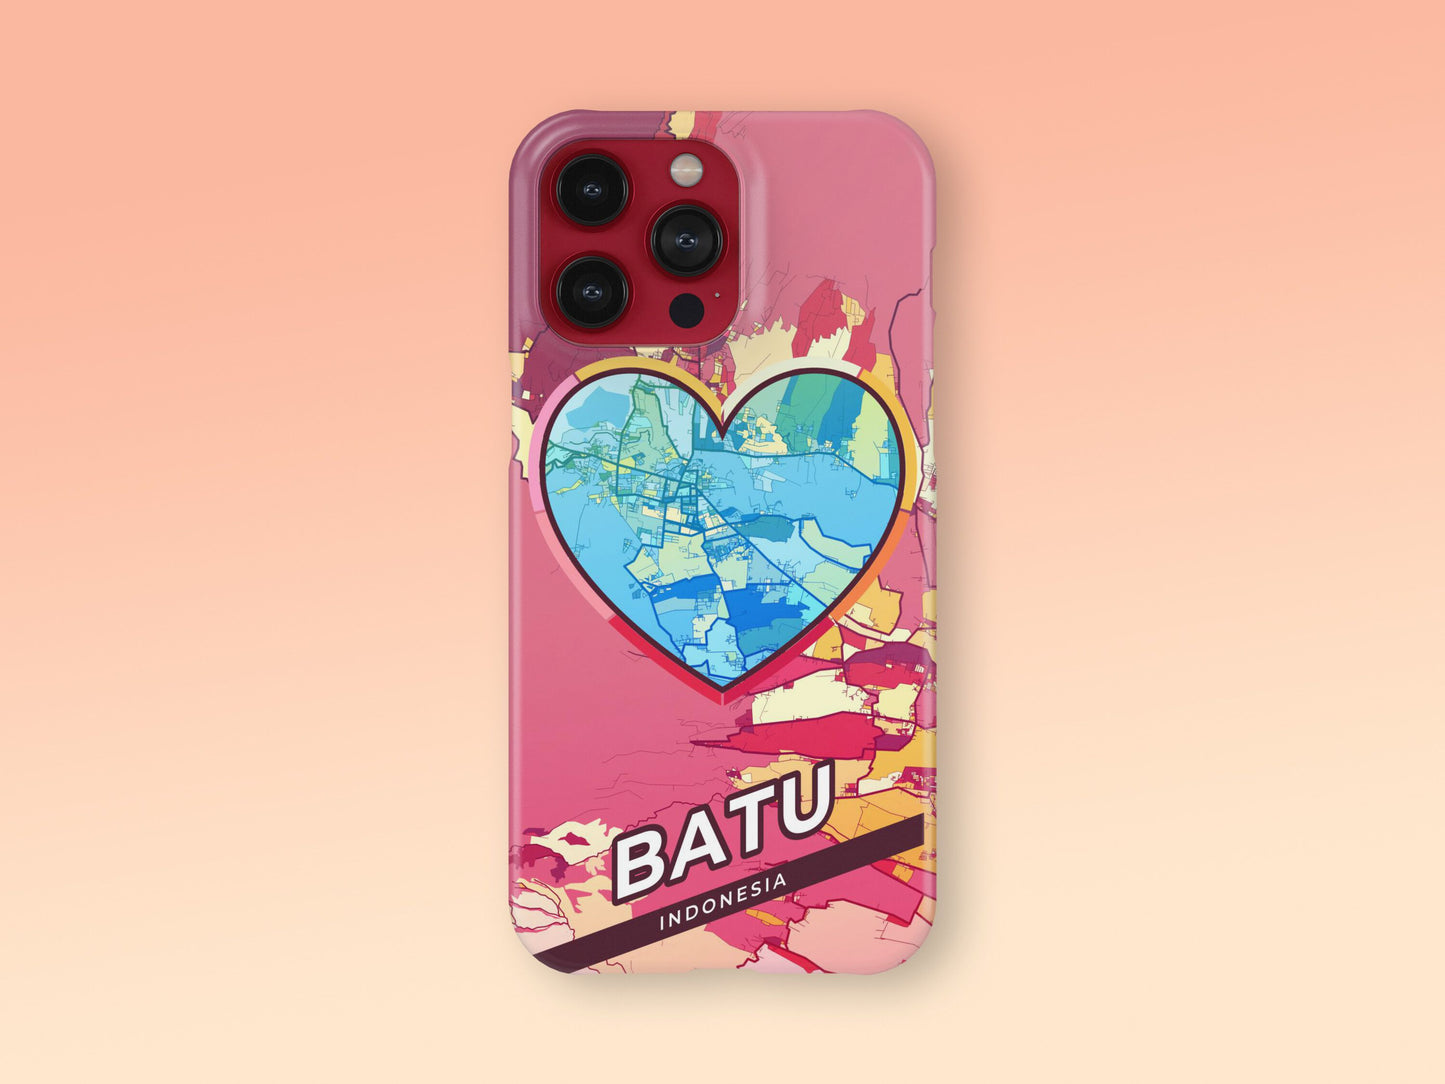 Batu Indonesia slim phone case with colorful icon. Birthday, wedding or housewarming gift. Couple match cases. 2